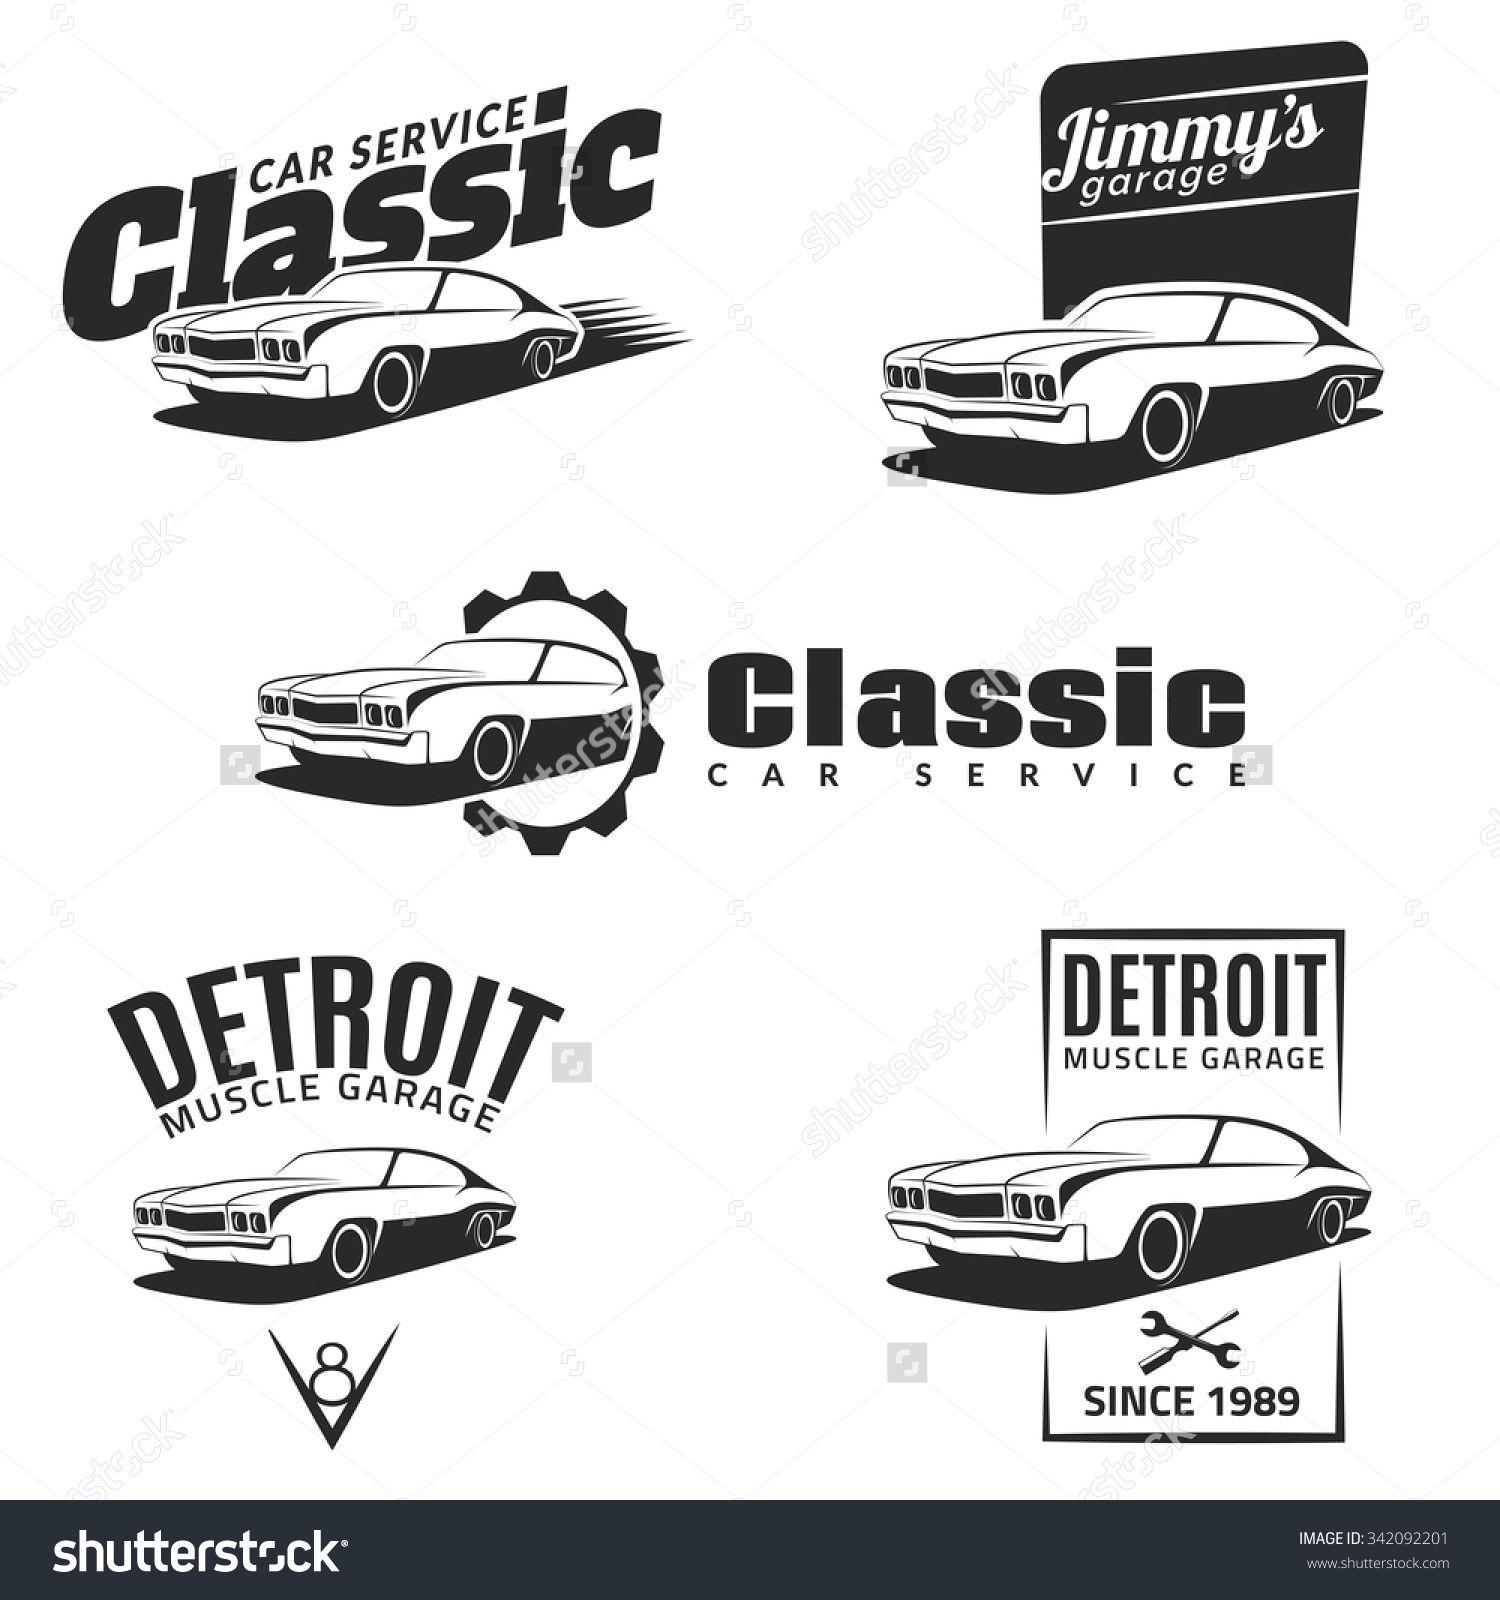 Classic Auto Repair Logo - Set of classic muscle car emblems, badges and icons. Service car ...